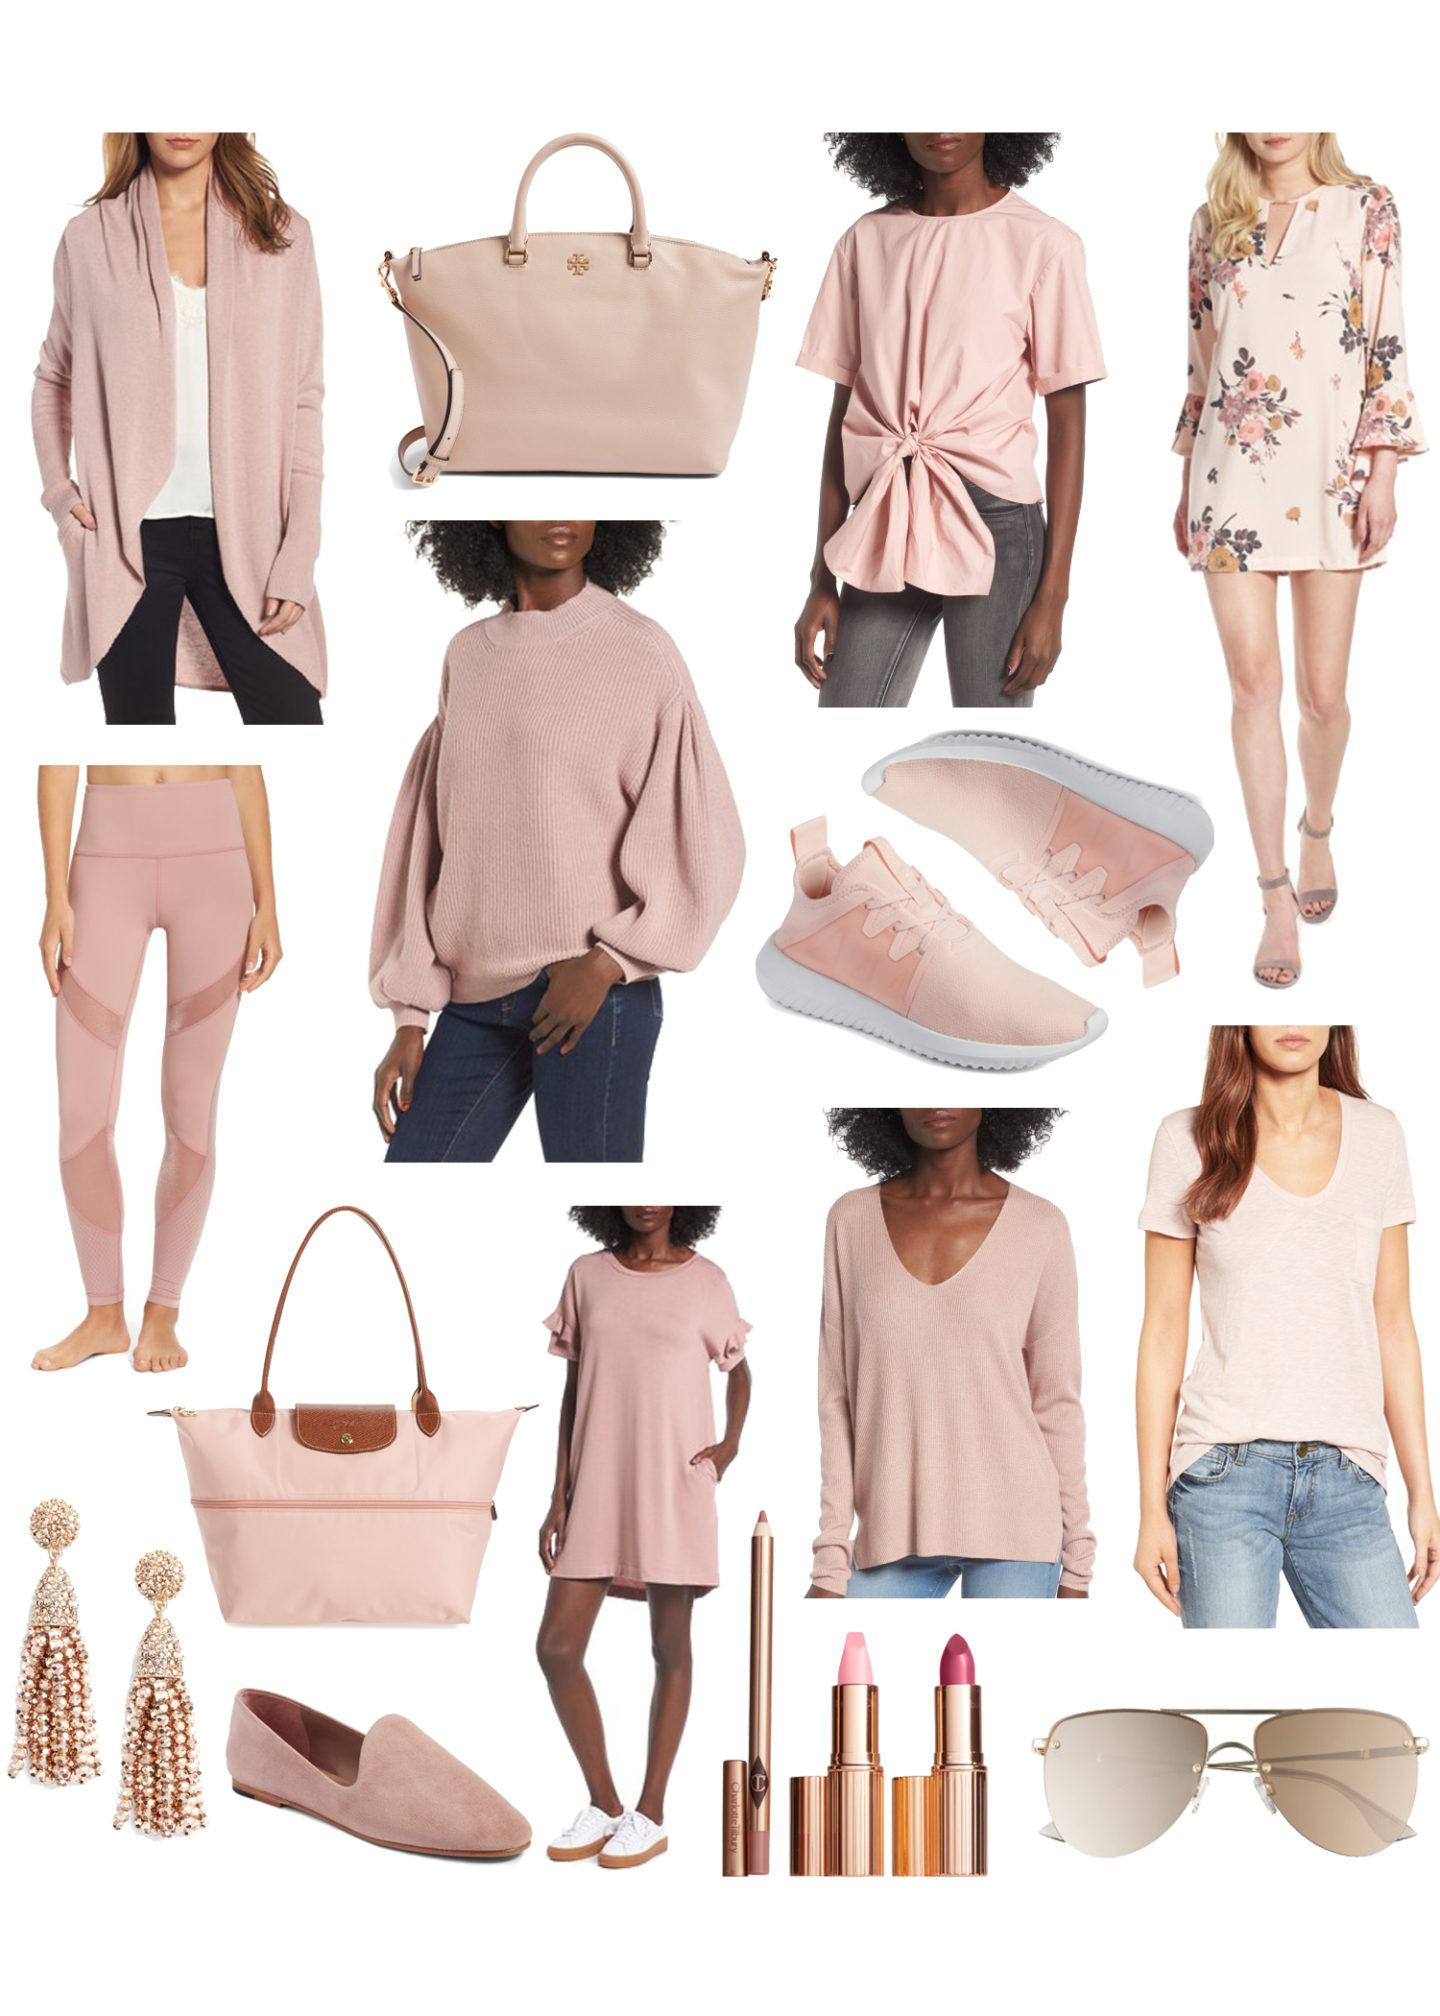 Nordstrom Anniversary Sale: All Things Pink